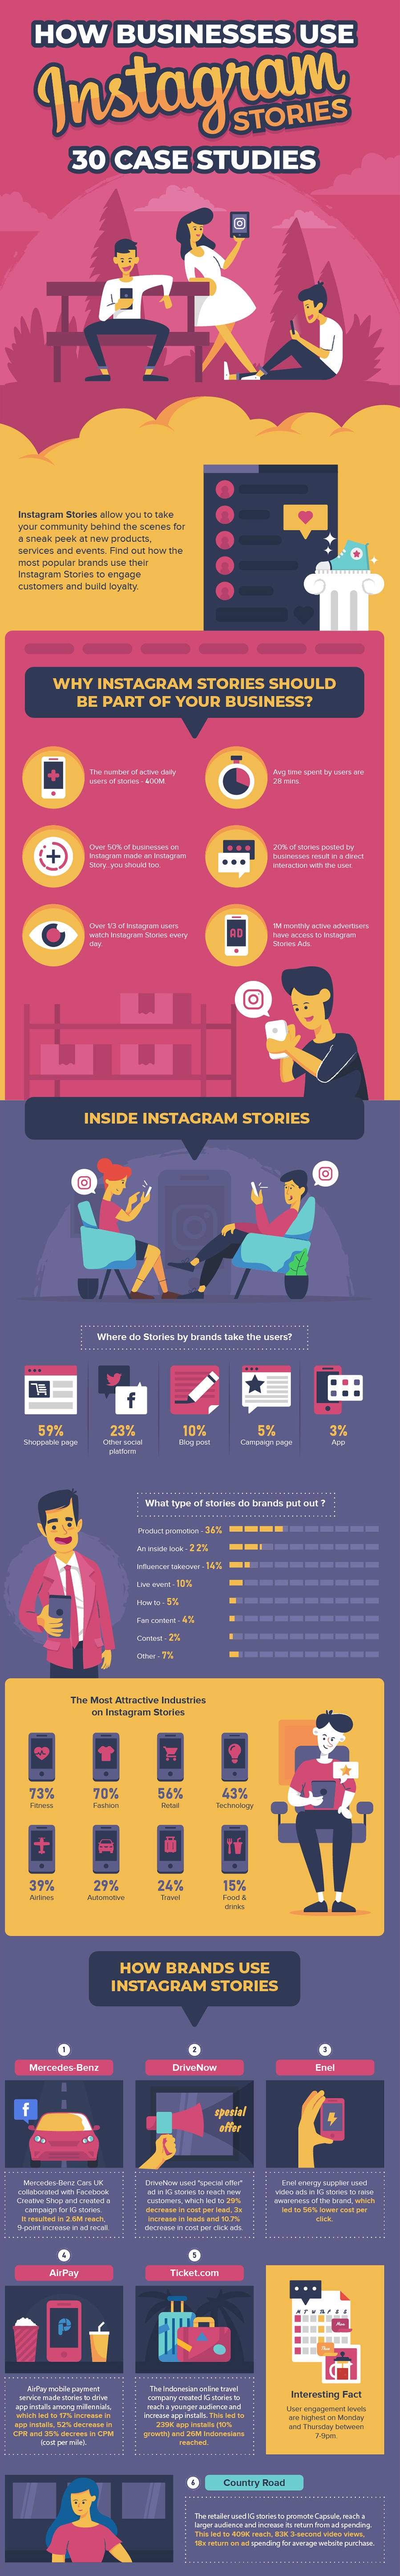 Growing your business with instagram stories